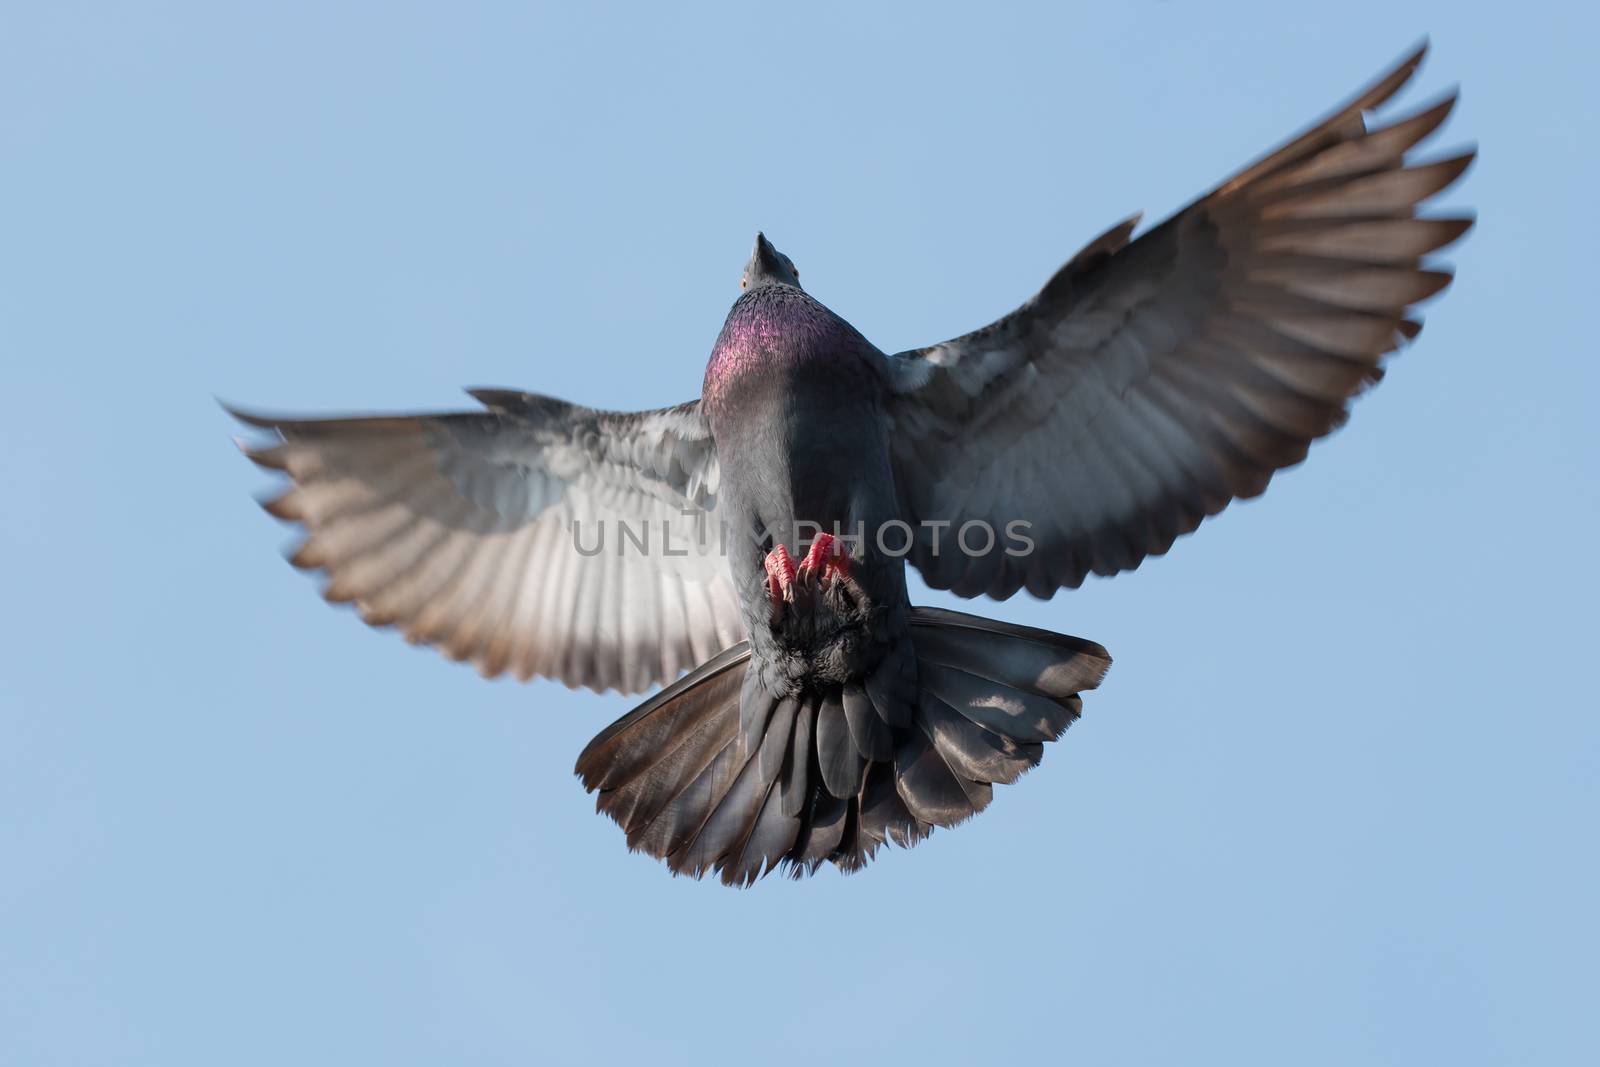 actions of flying pigeon on blue background